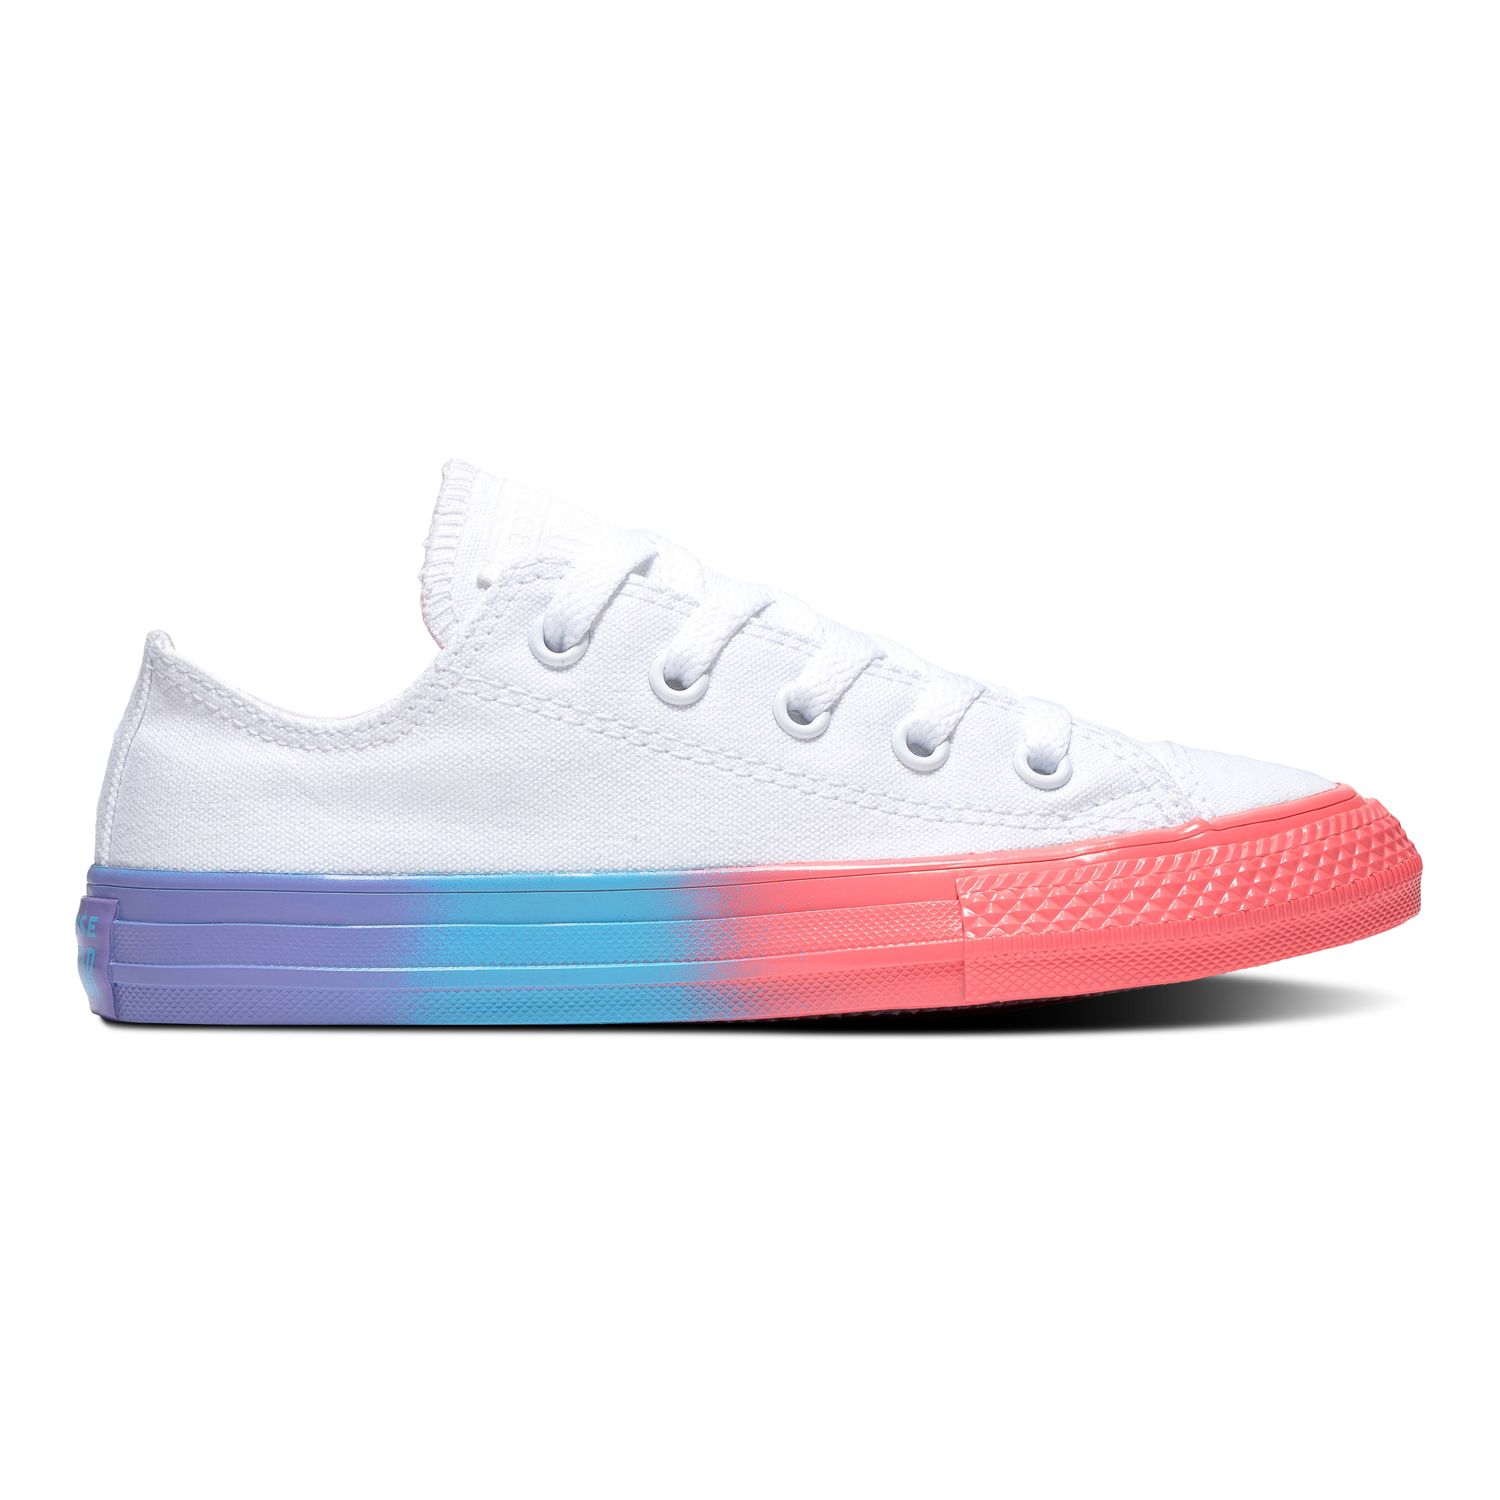 Girls' Converse Chuck Taylor All Star Rainbow Ice Sneakers